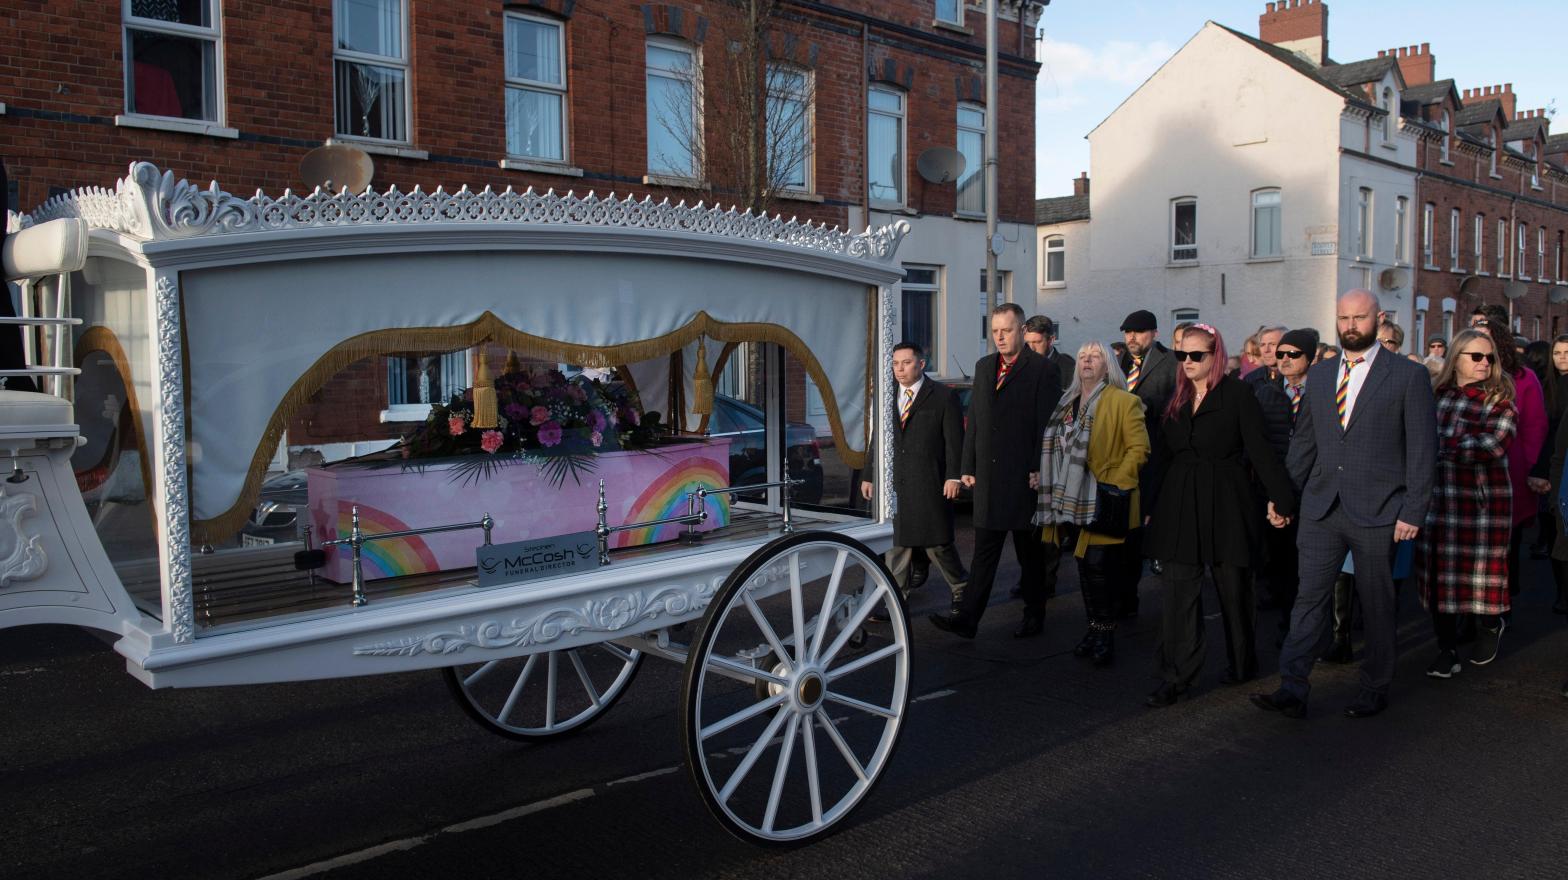 The funeral of 5-year-old Stella-Lily McCorkindale on December 14, 2022 in Belfast, Northern Ireland. Stella-Lily died following a severe case of the bacterial infection strep A. (Photo: Charles McQuillan, Getty Images)